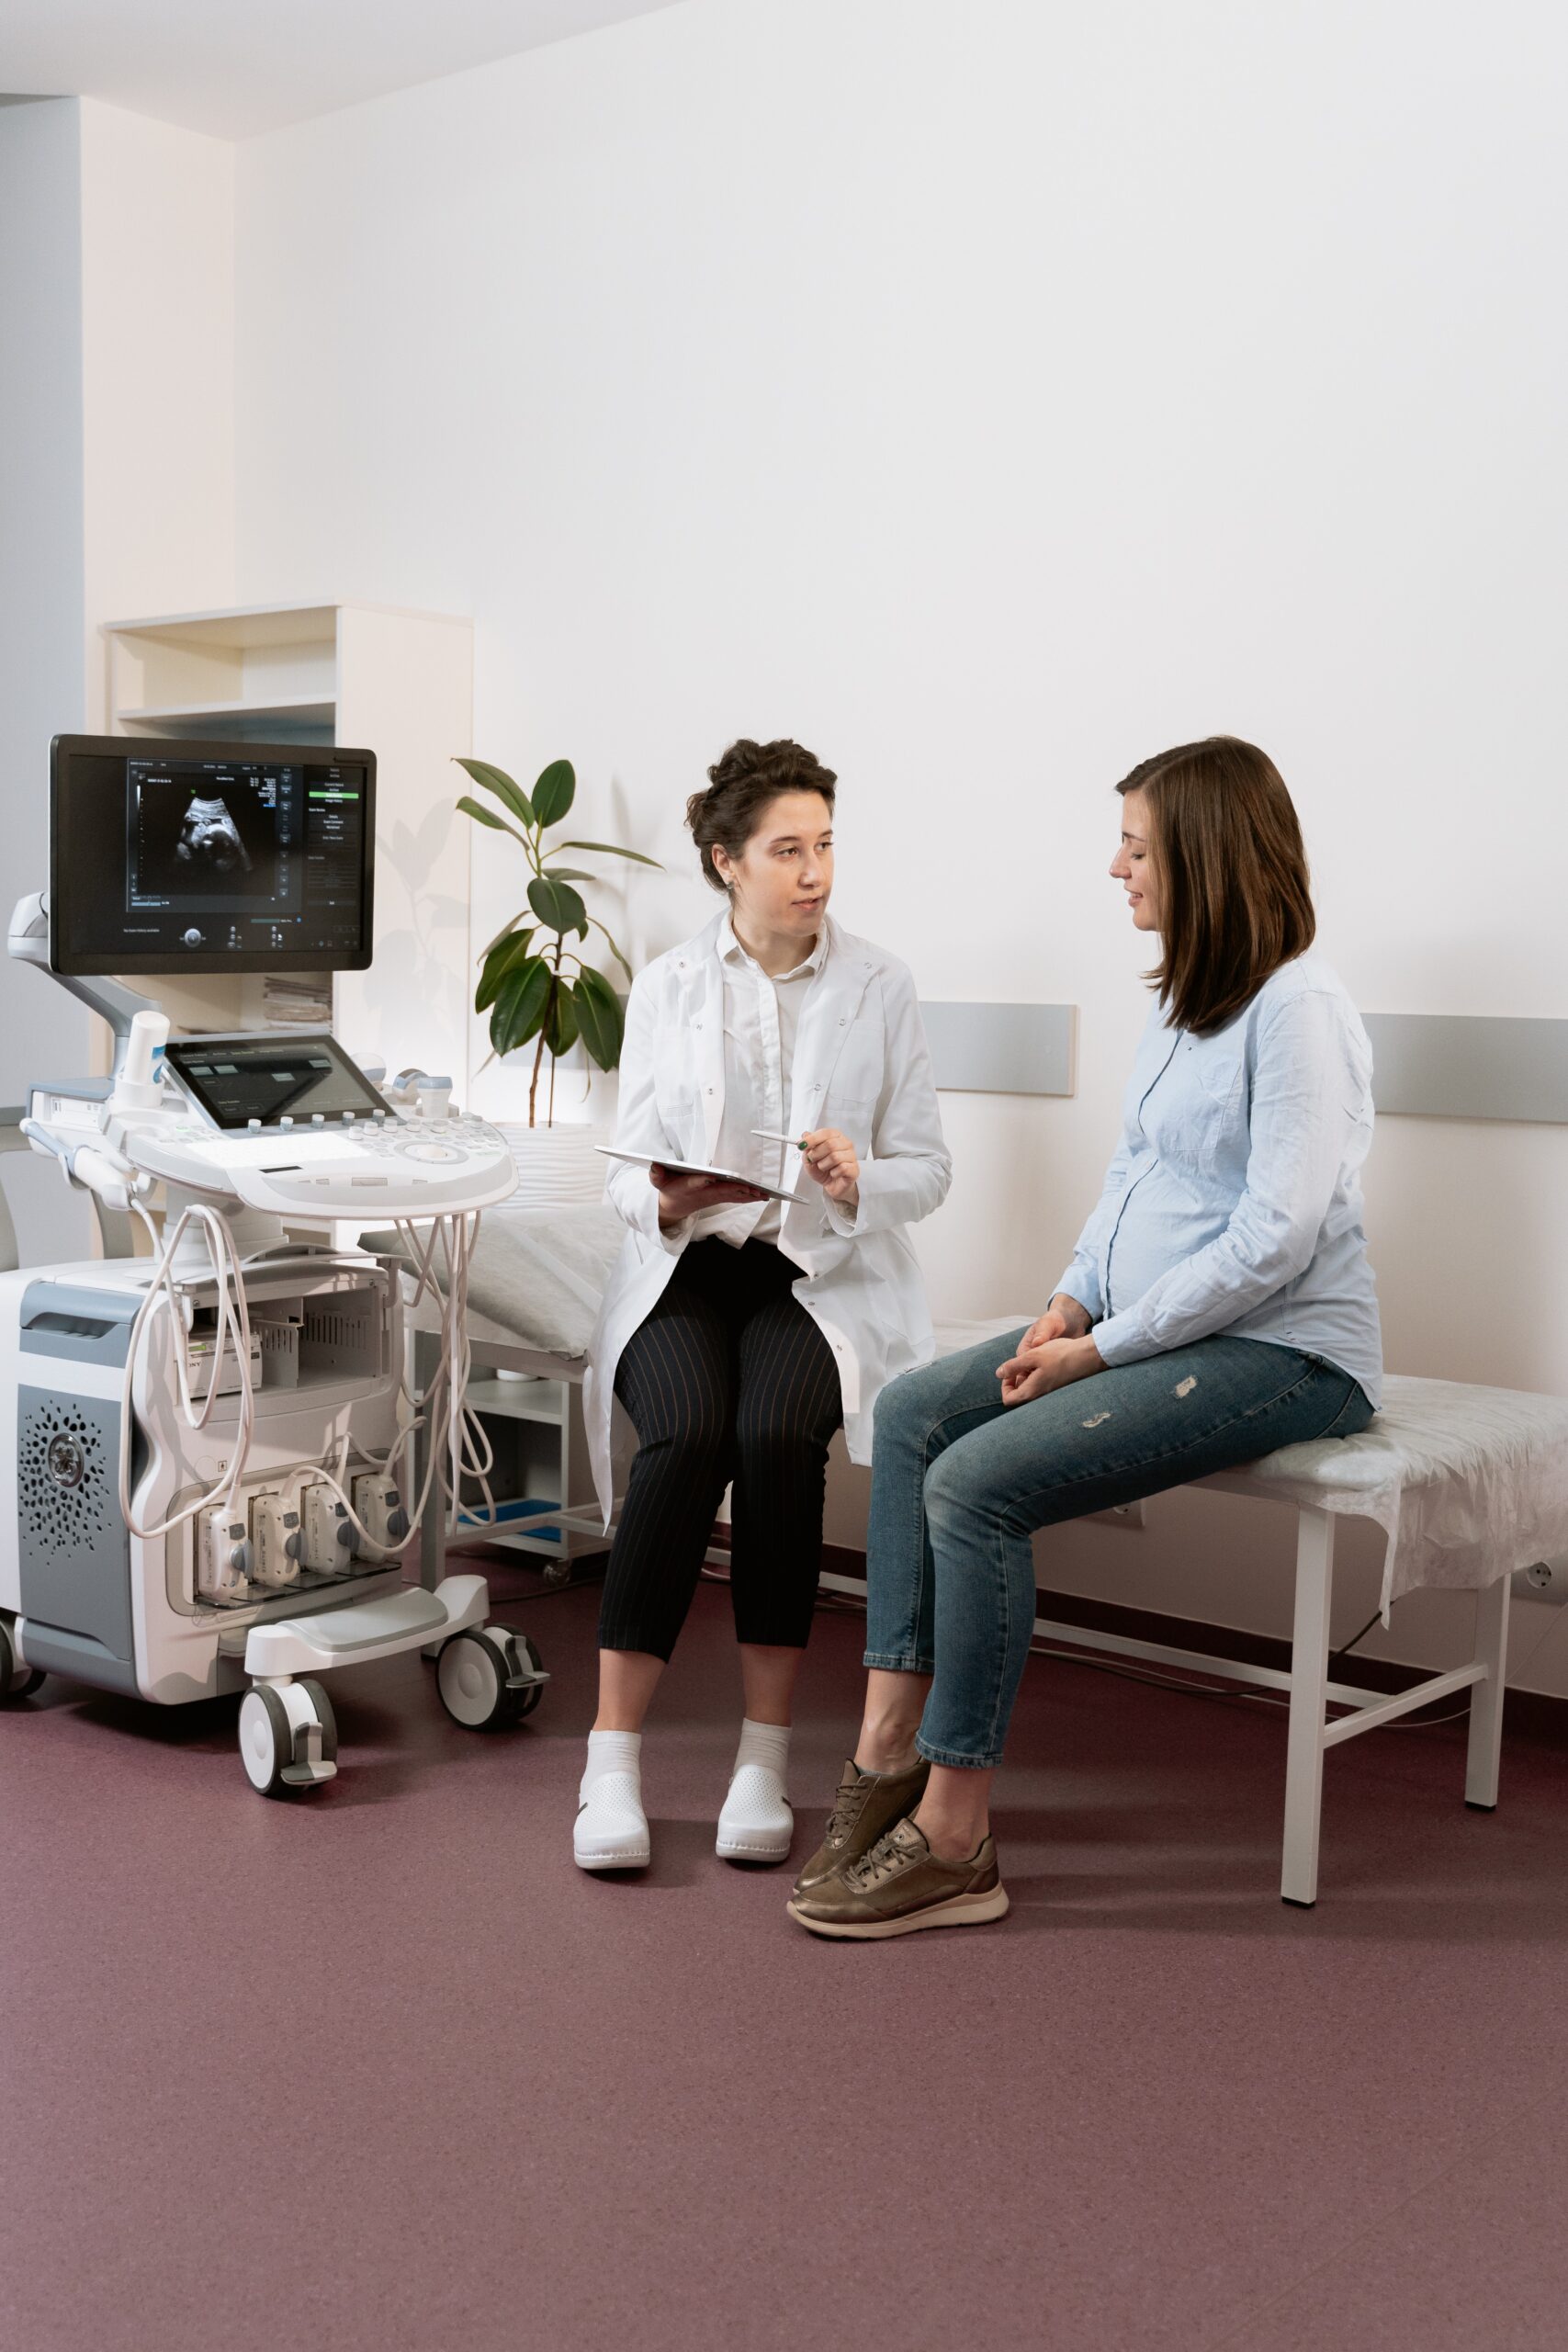 Top Questions When Choosing an OBGYN For Prenatal Care